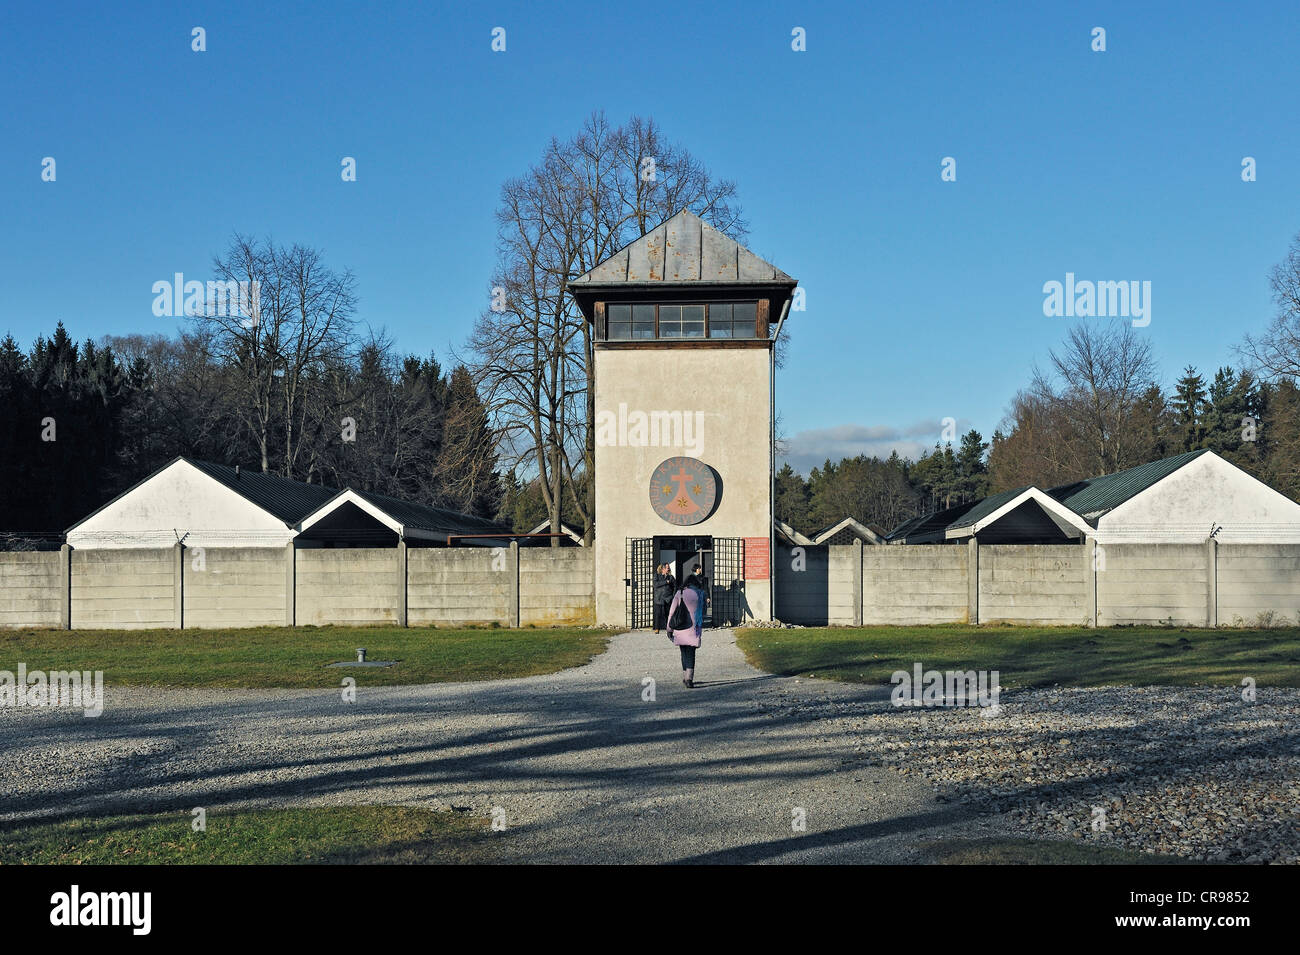 Watchtower and Kloster Karmel 'Heilig Blut', Karmel holy blood monastery, in the concentration camp grounds, Dachau near Munich Stock Photo